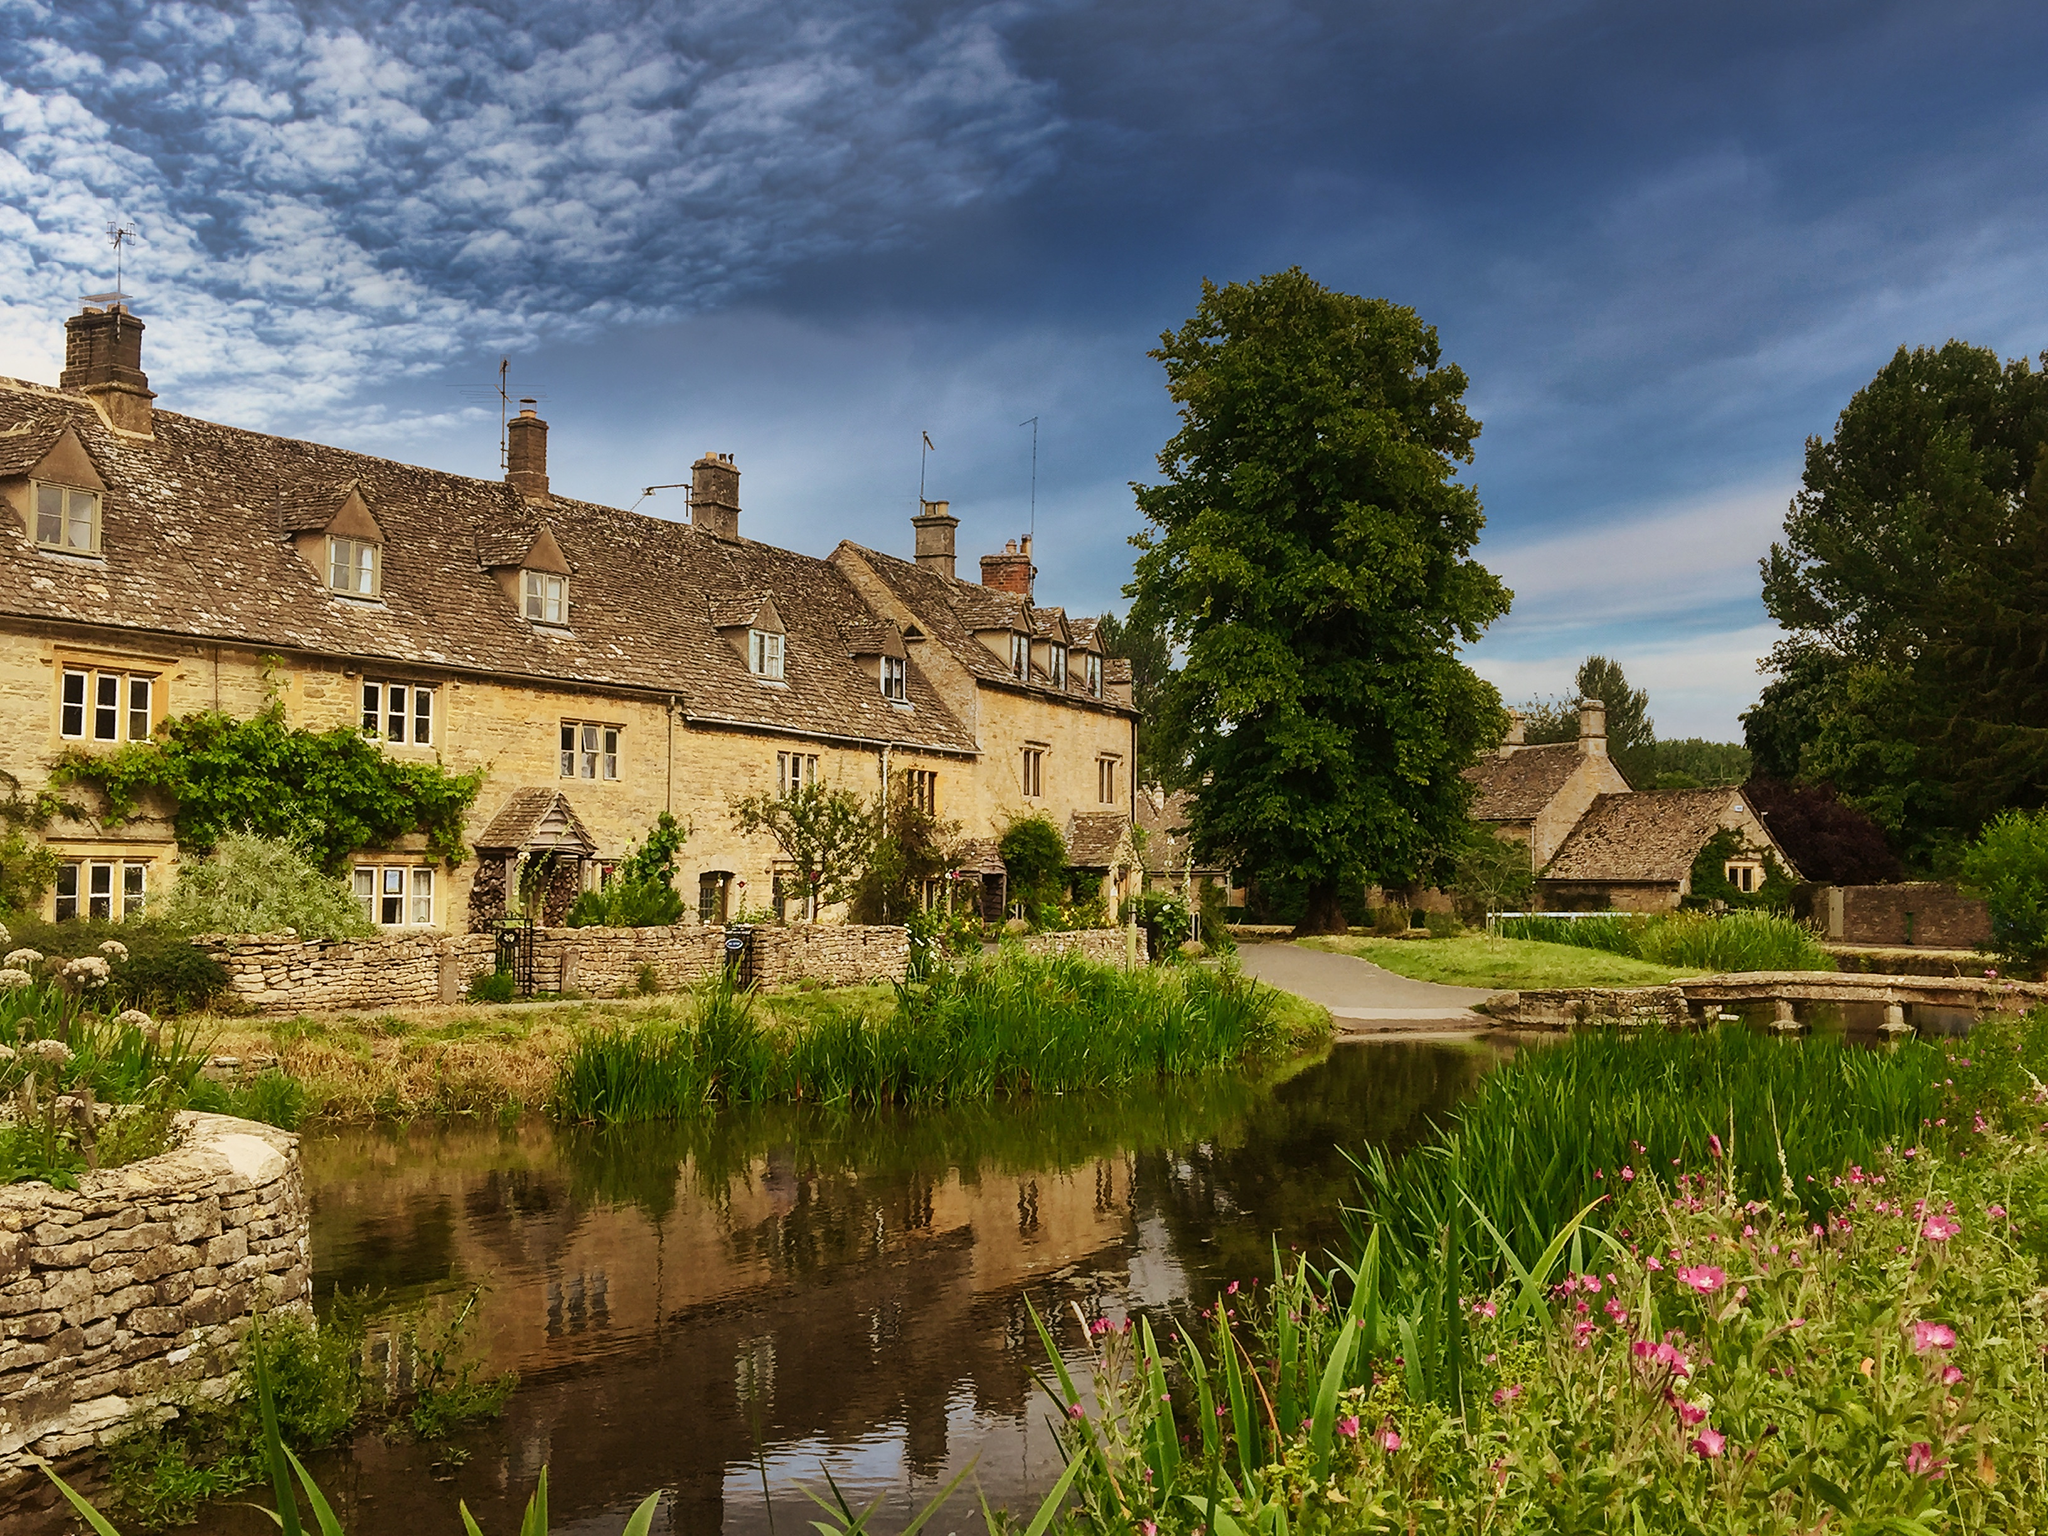 The finest hotels in this preposterously pretty part of England